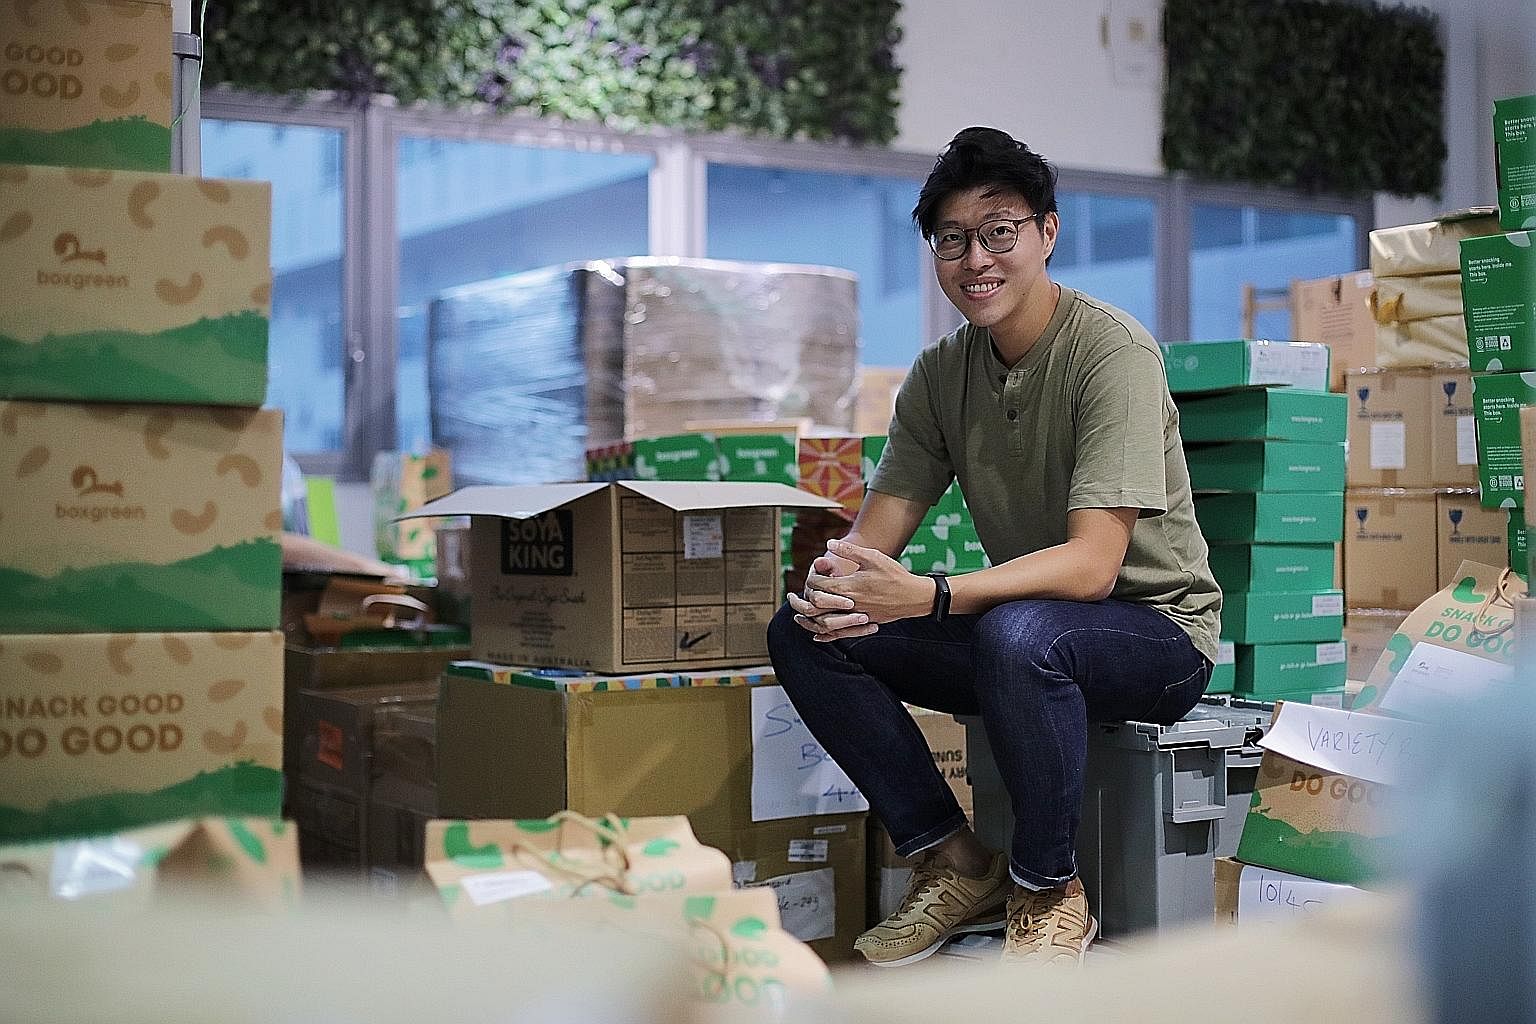 Food service BoxGreen, which Mr Walter Oh co-founded, is a B-corp certified business, which means it uses business as a force for good.